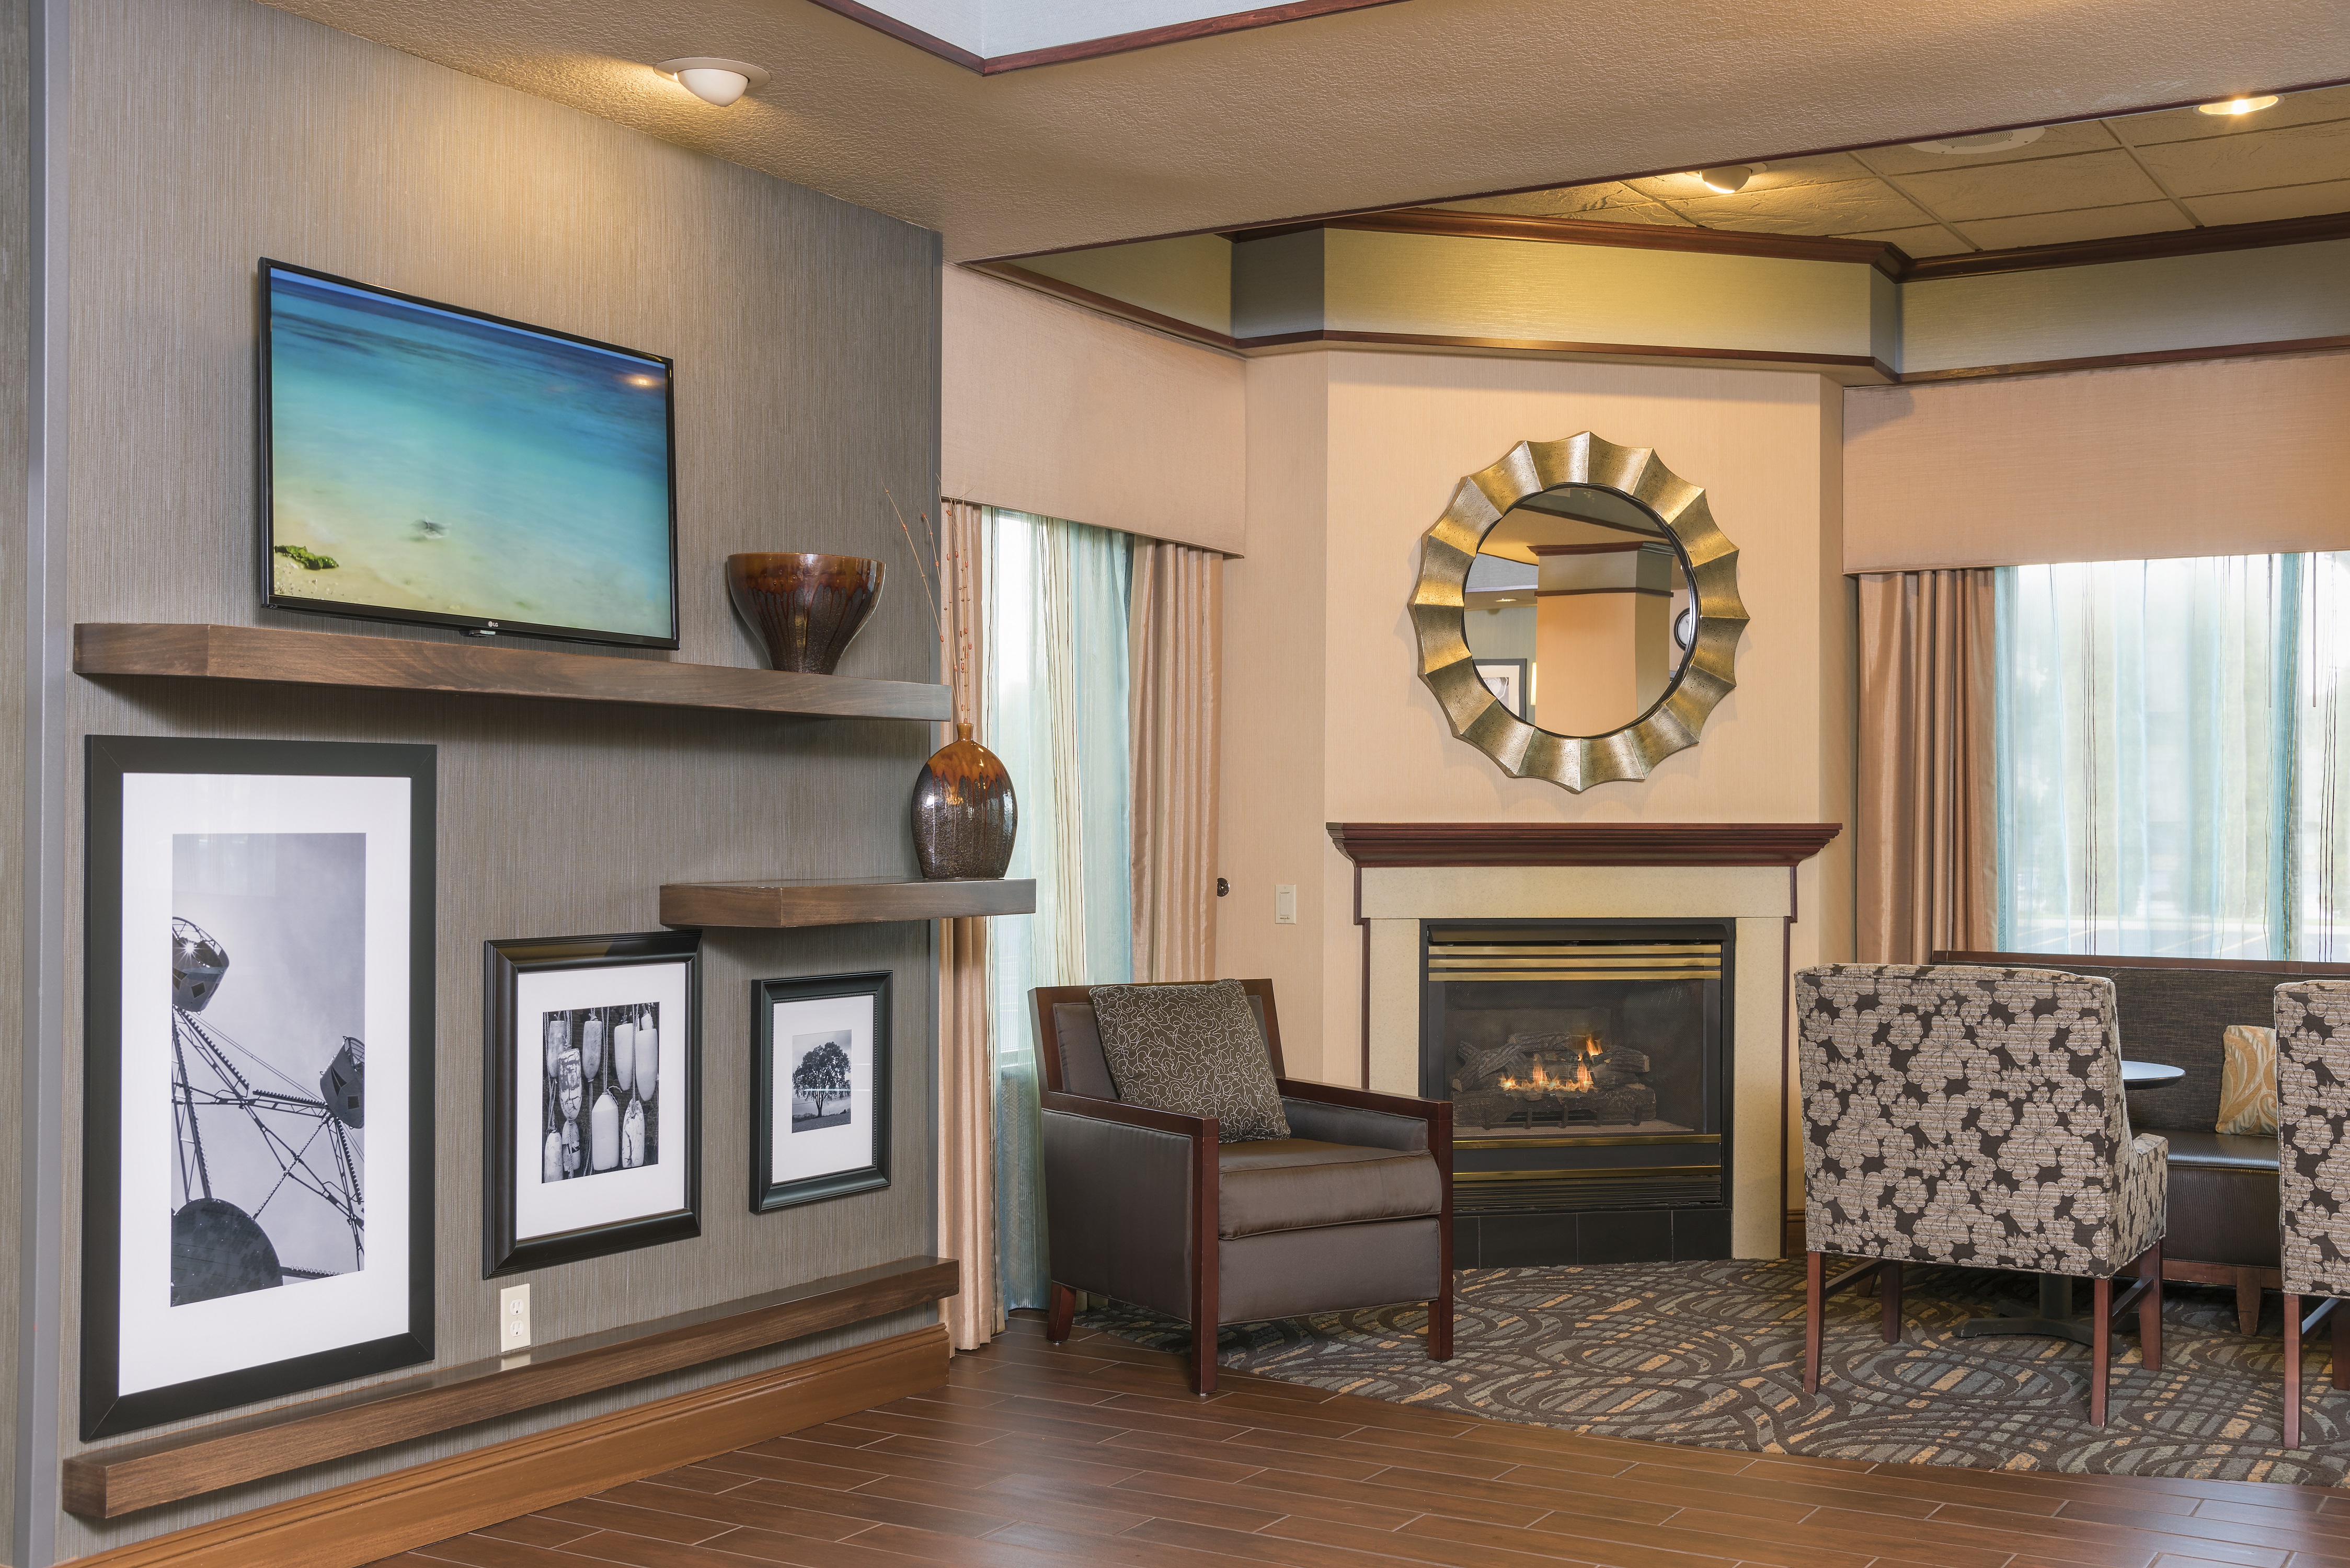 Lobby Seating Area with Seats, Wall Mounted HDTV and Fireplace